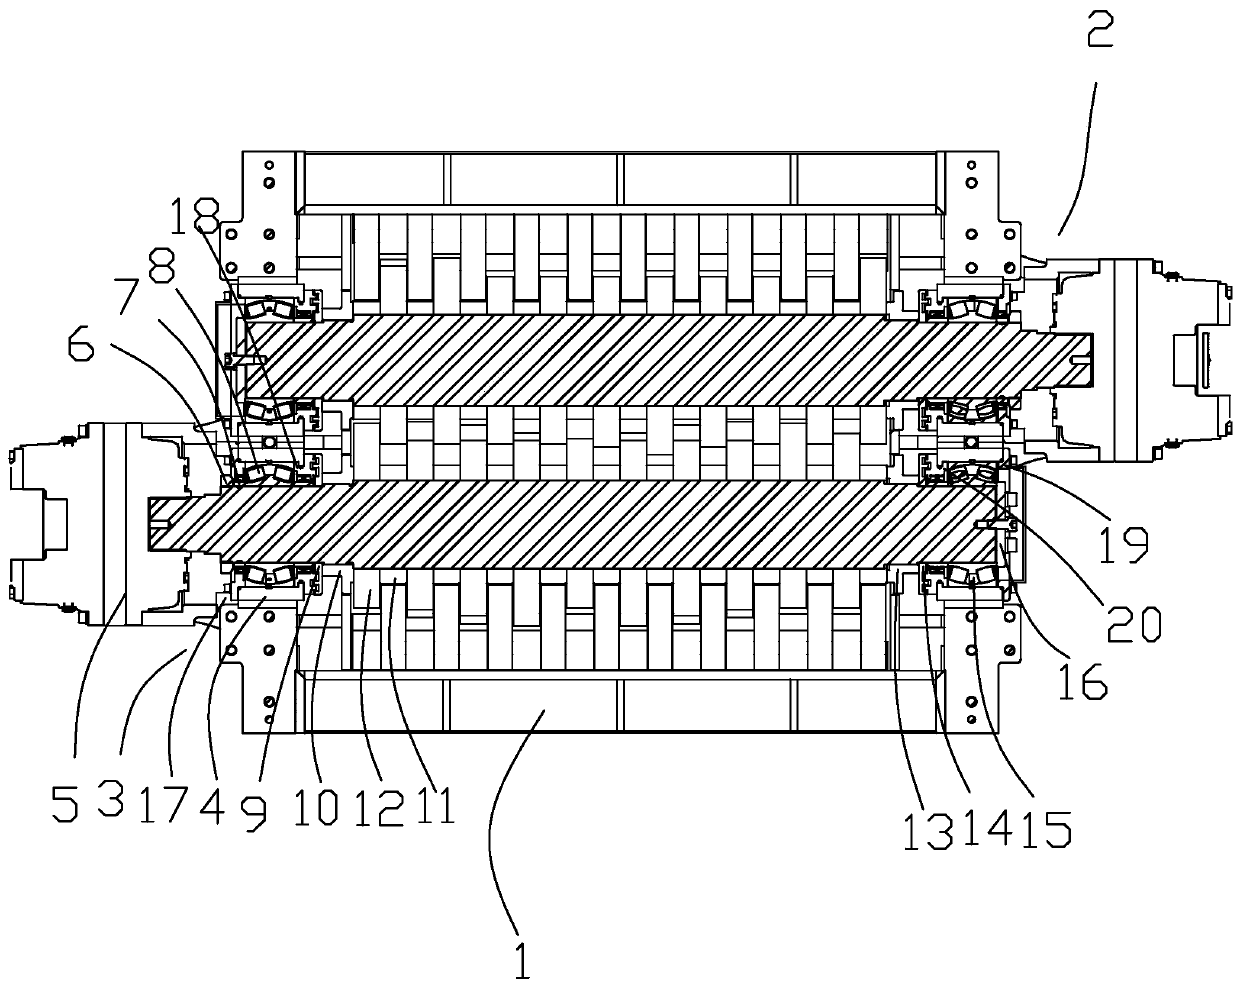 A single-side positioning method for the main shaft of a garbage double-shaft shredder